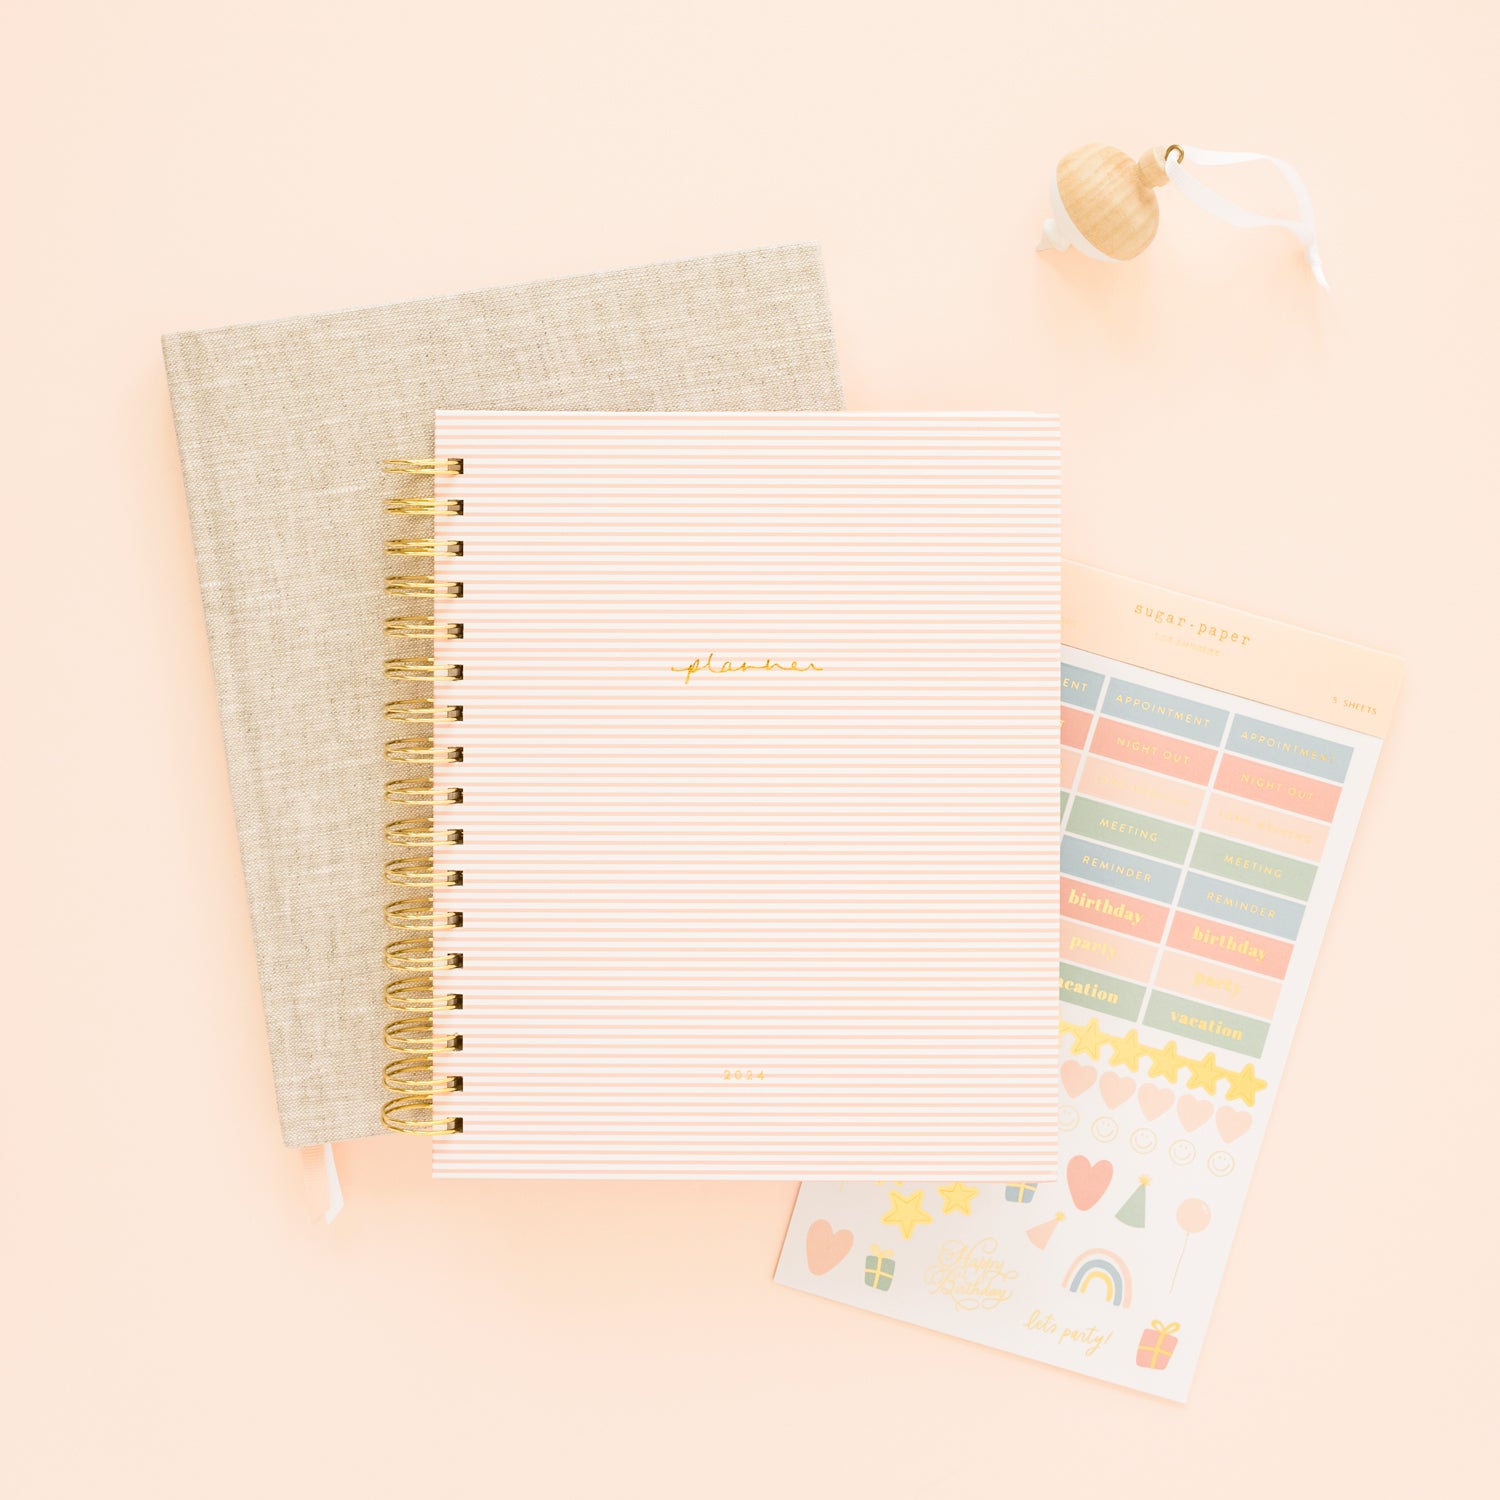 Gifts for the Planner